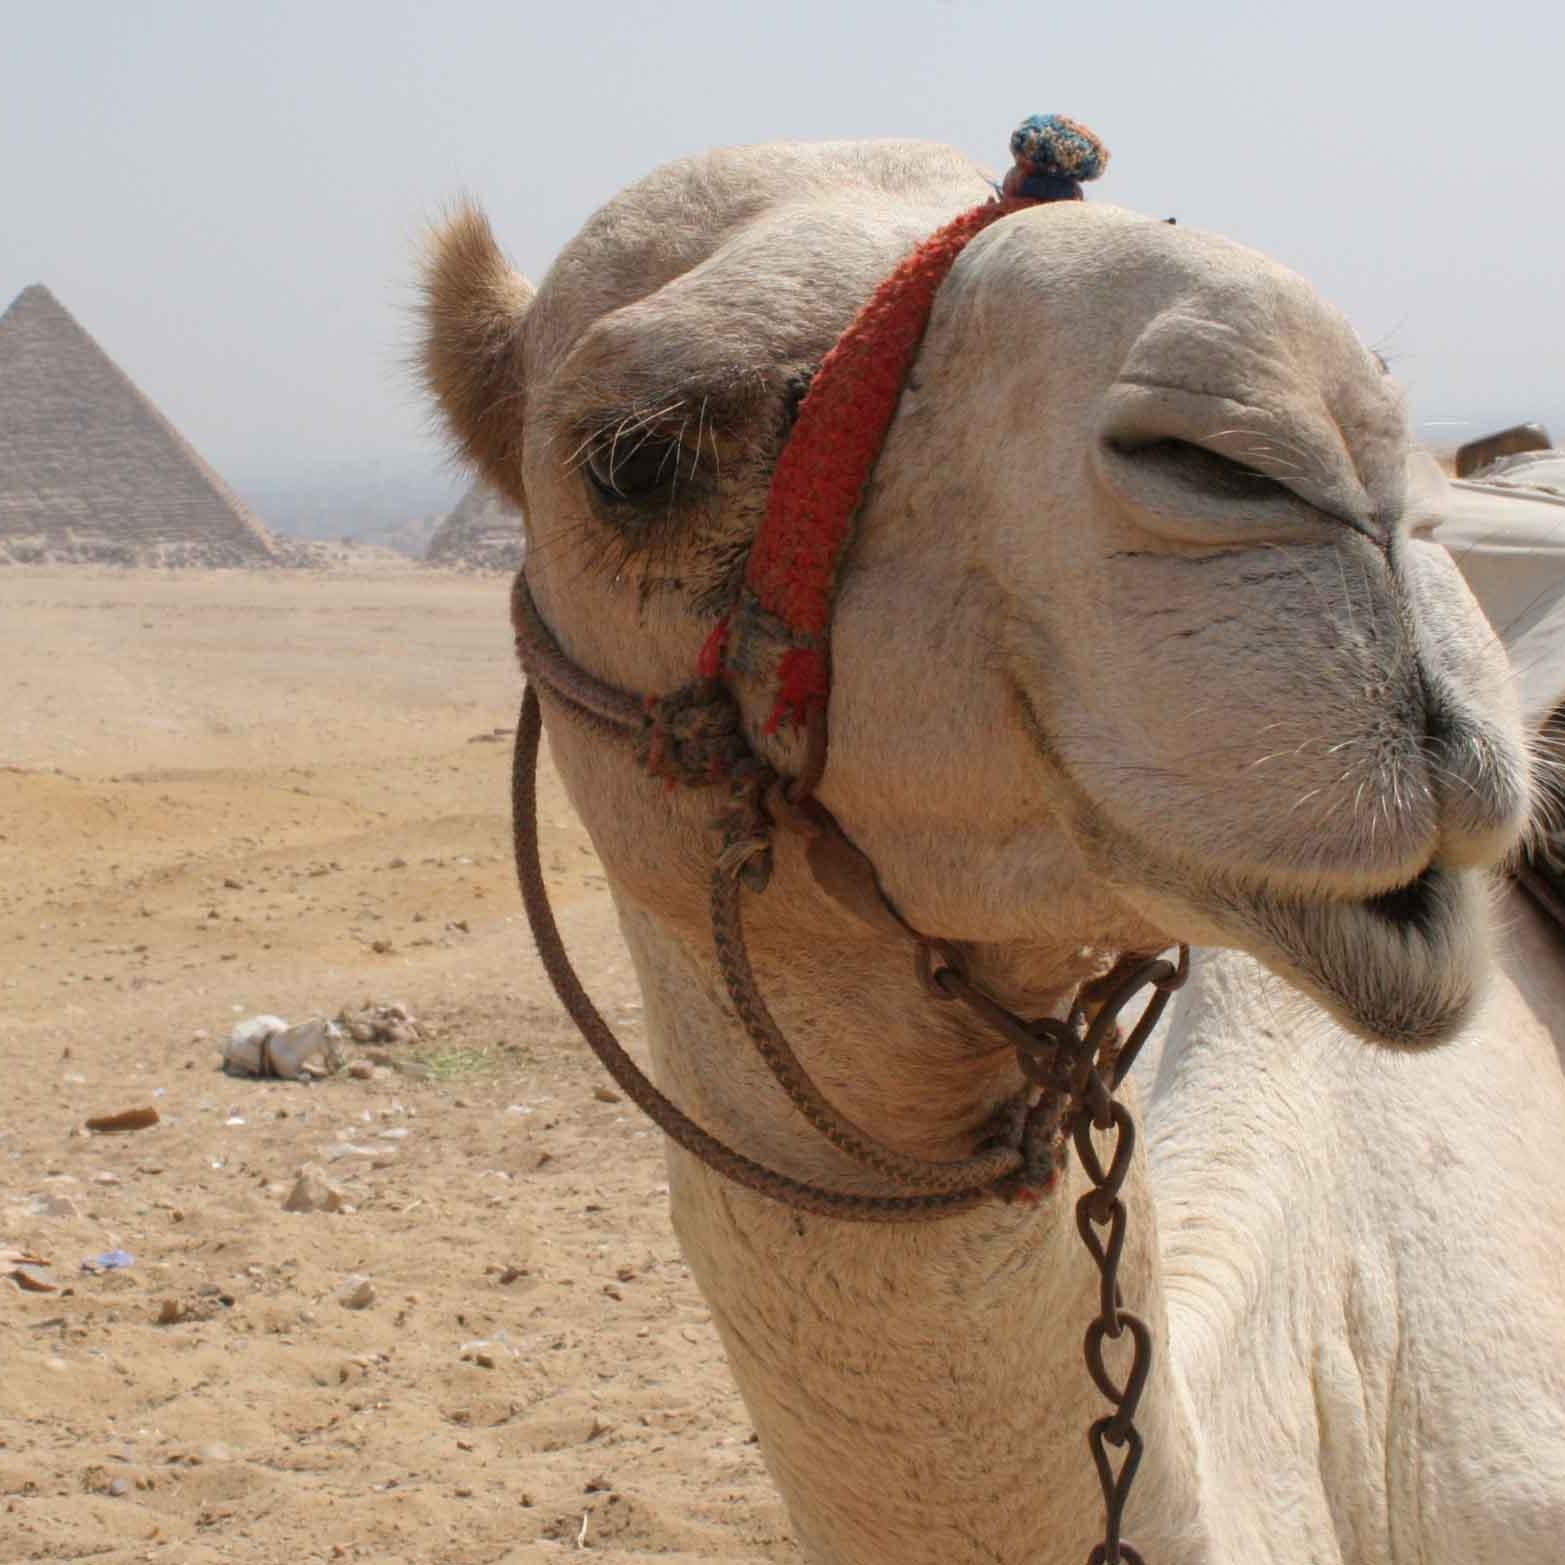 A camel in need of the Sahara